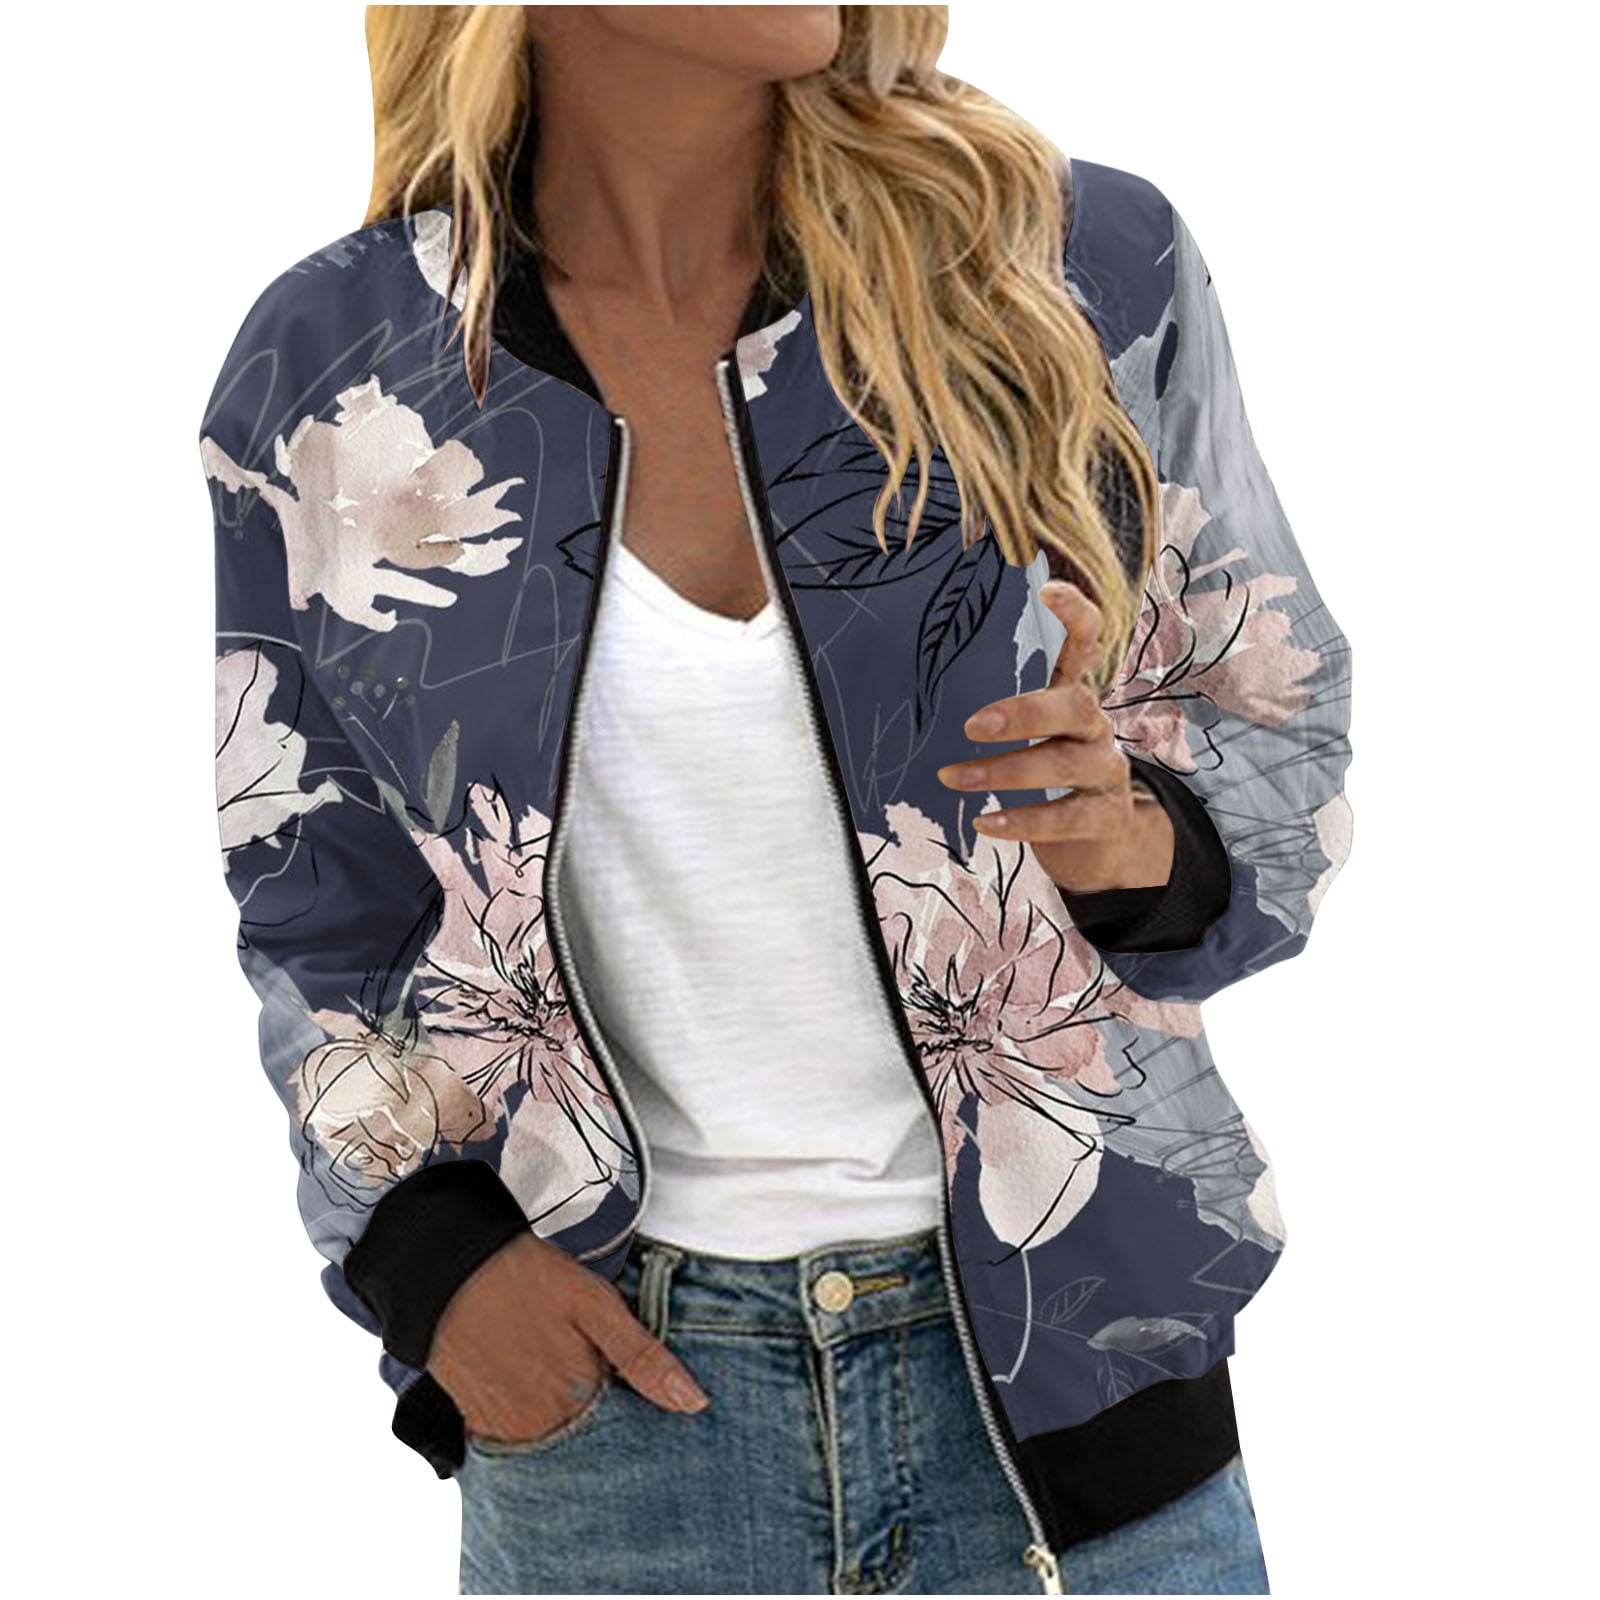 CHUOAND Women's Solid Color Jacket,my account with prime,1 dollar items  only,bulk t-shirts wholesale for printing,womens clothes clearance,sale